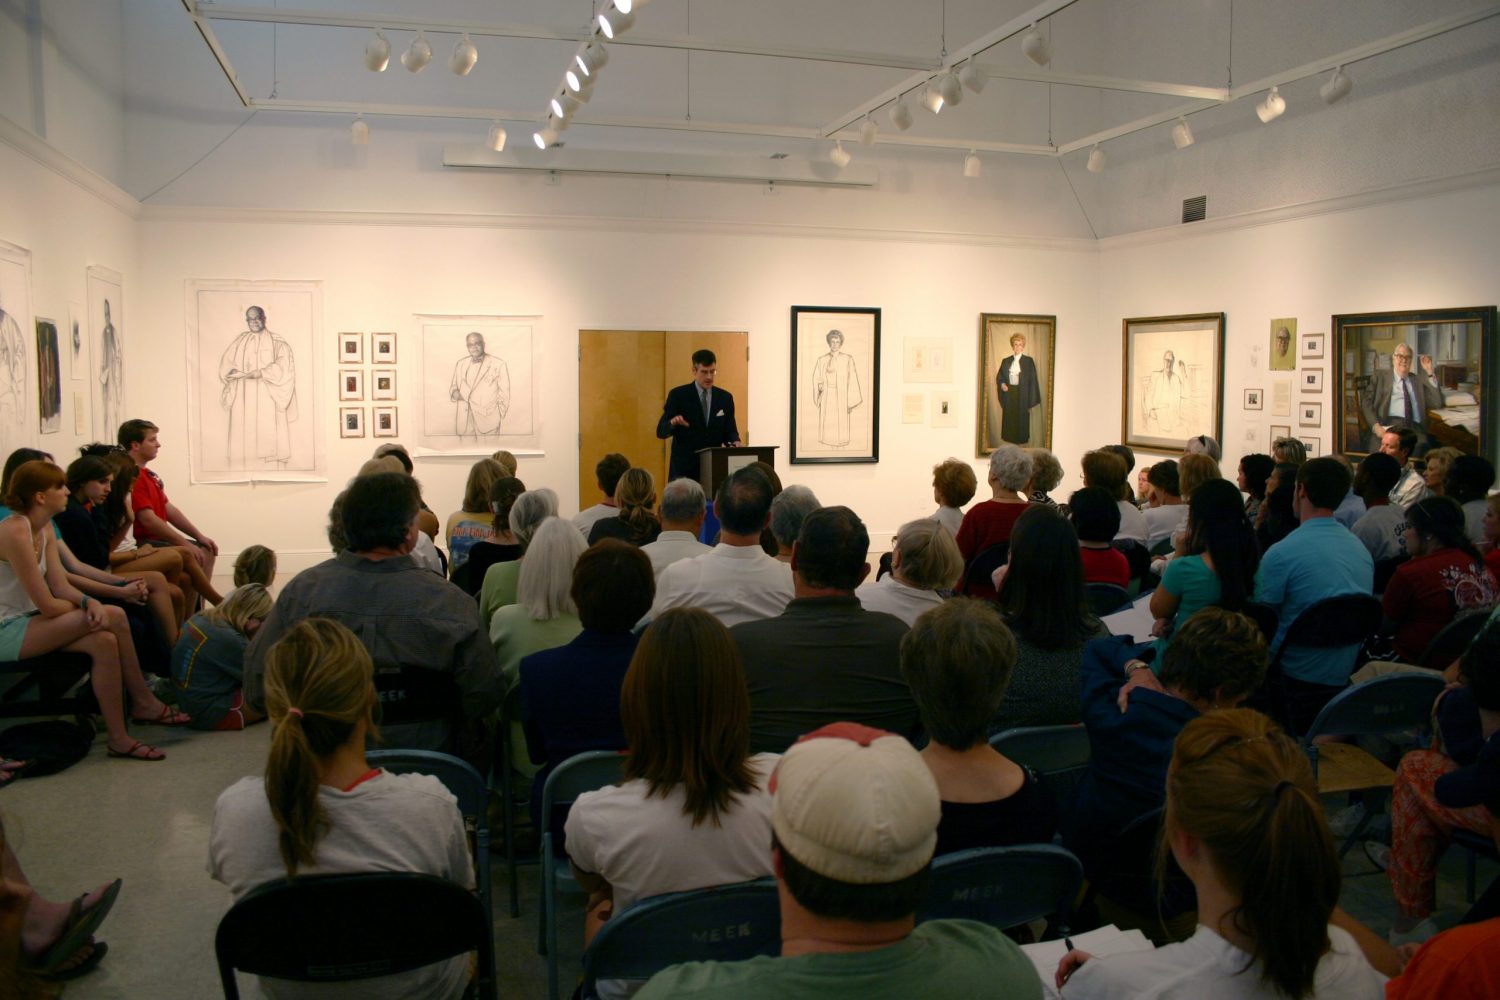 Artist giving a talk to a crowd in the department's gallery.